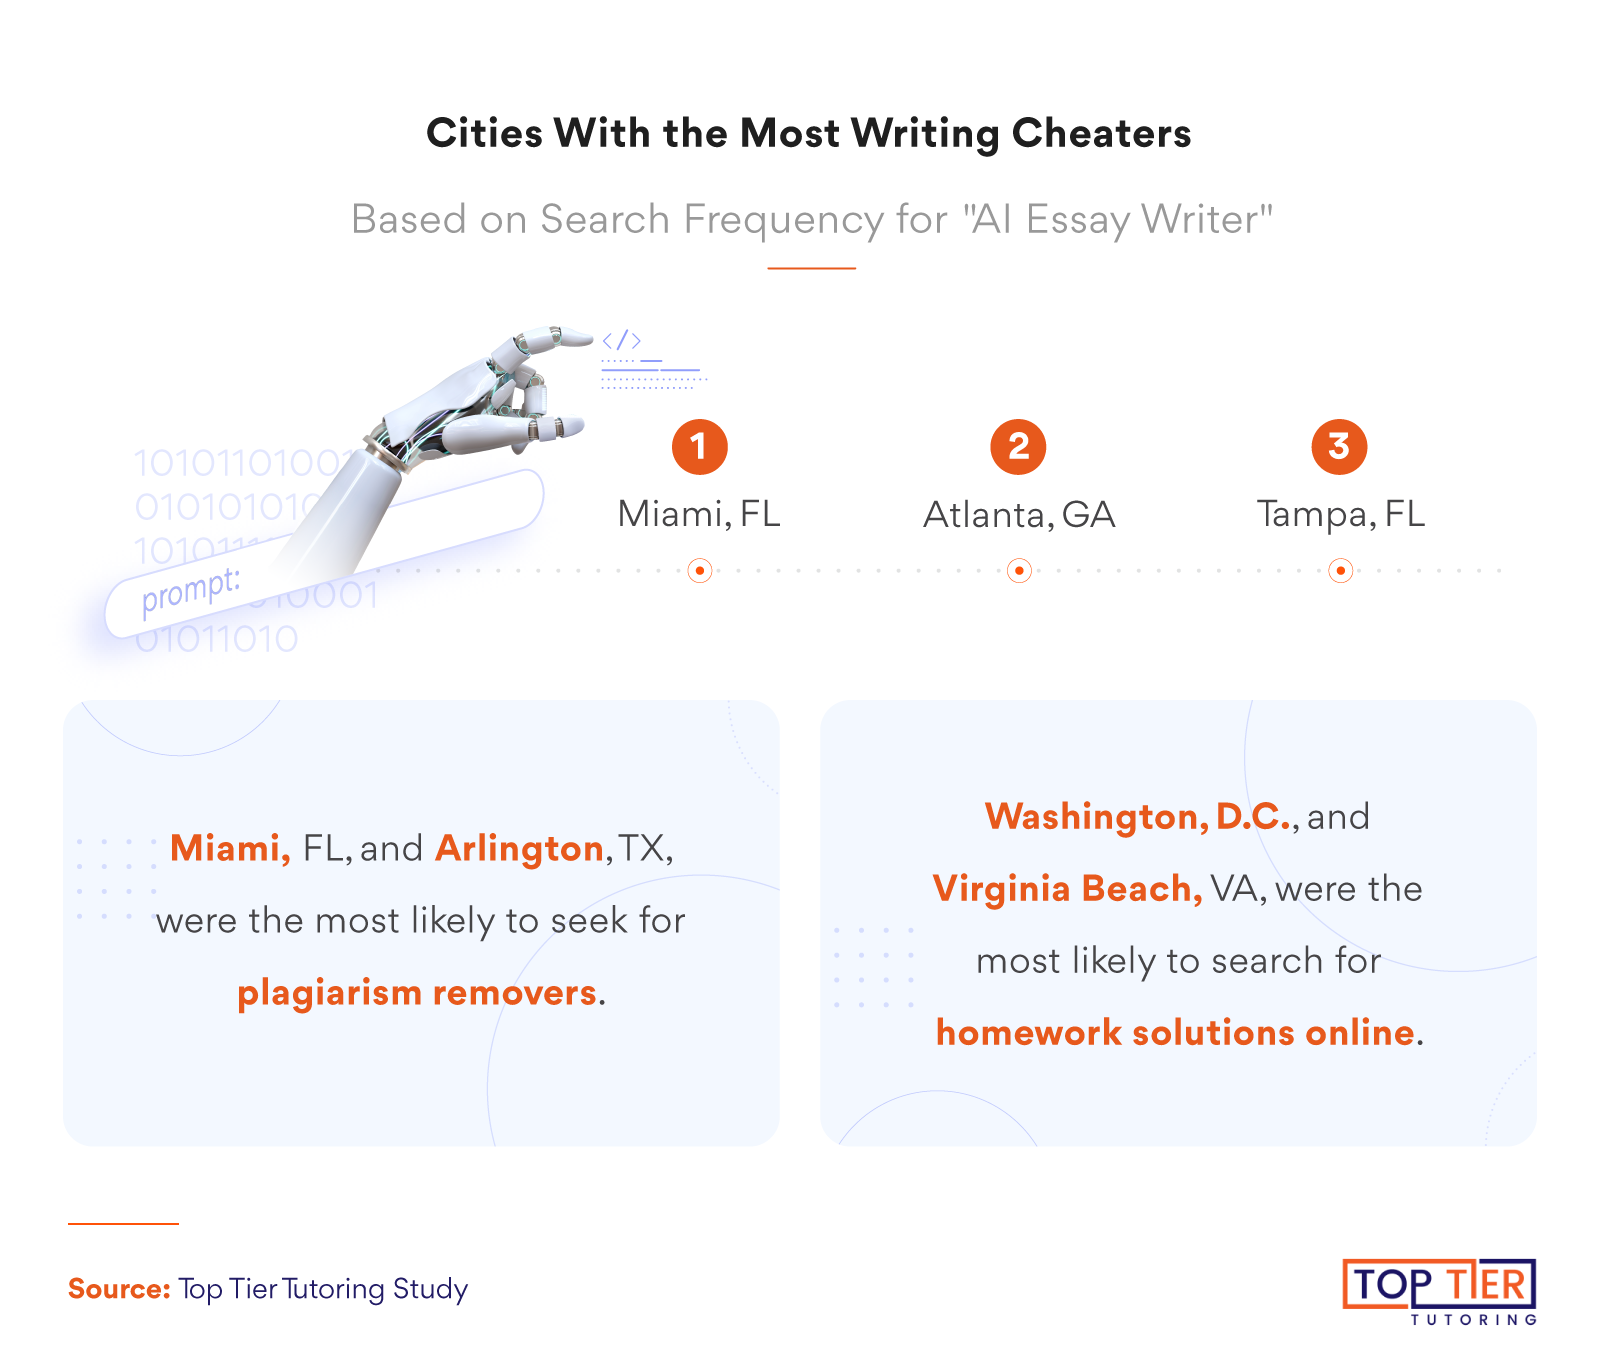 Infographic on writing cheating by city.